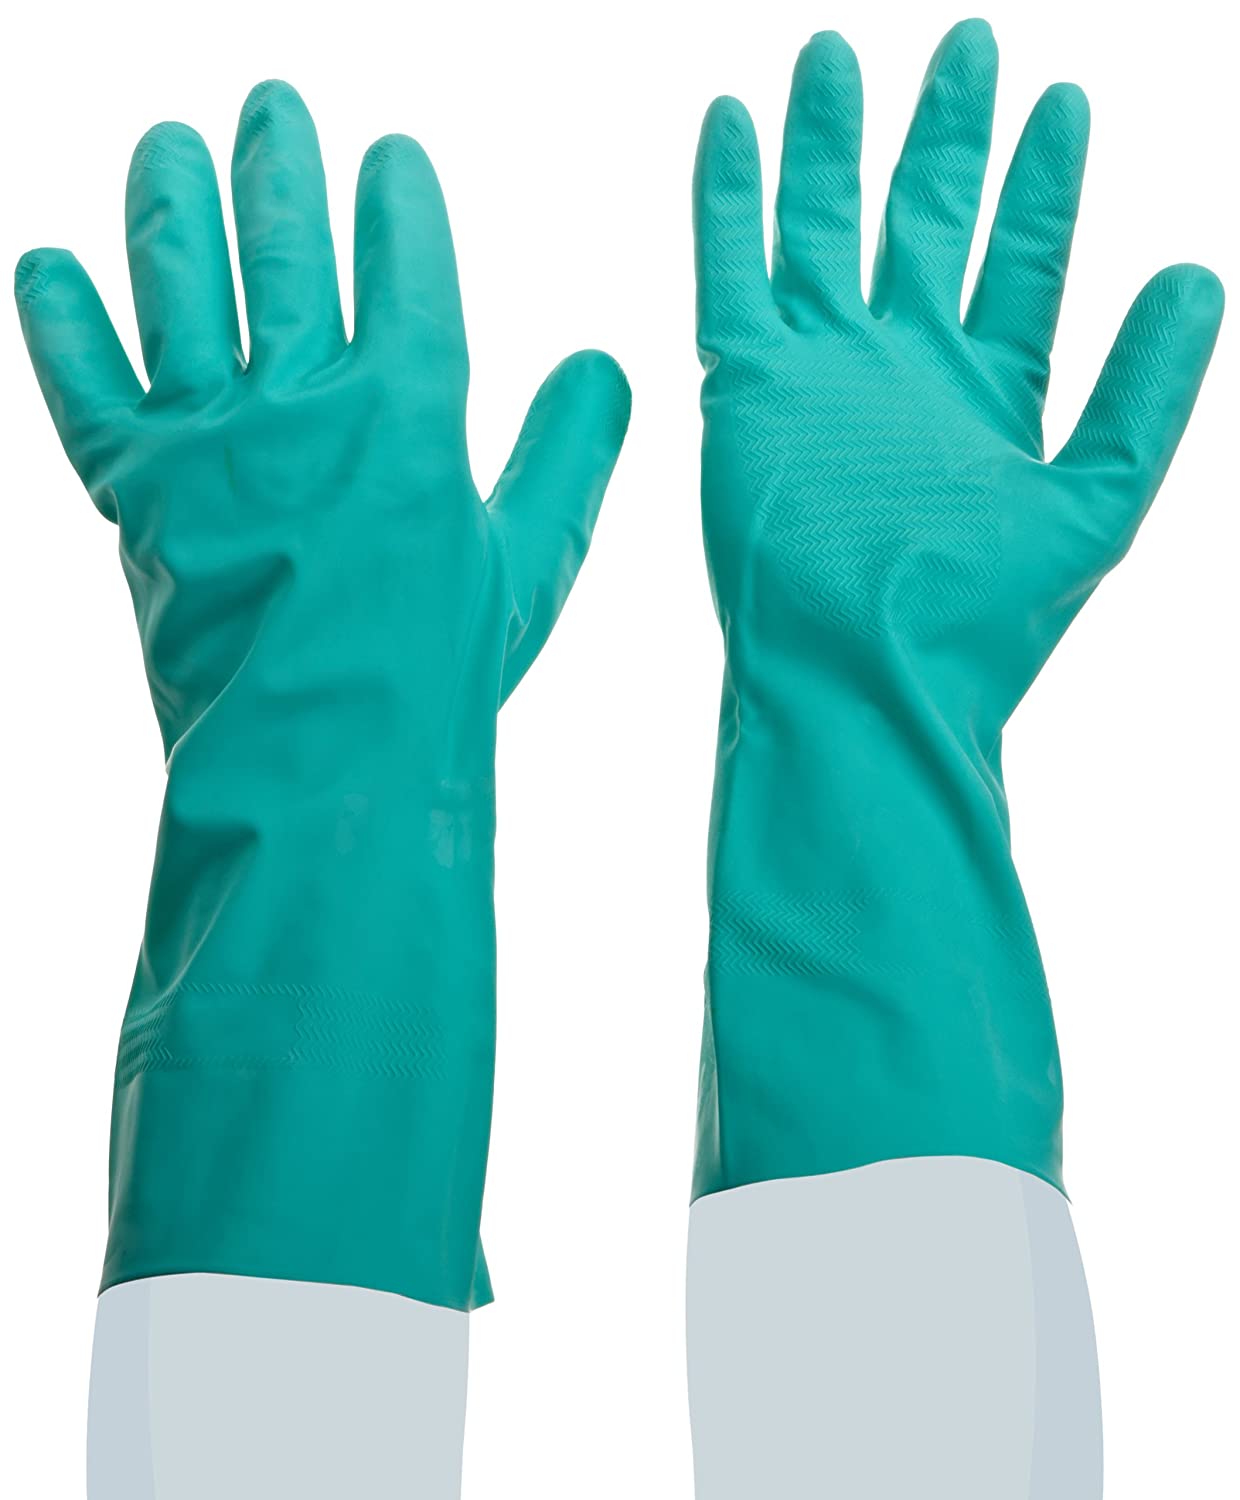 Showa® NM15FL chemical-resistant 15-mil unsupported 13-inch flock lined Nitrile Gloves